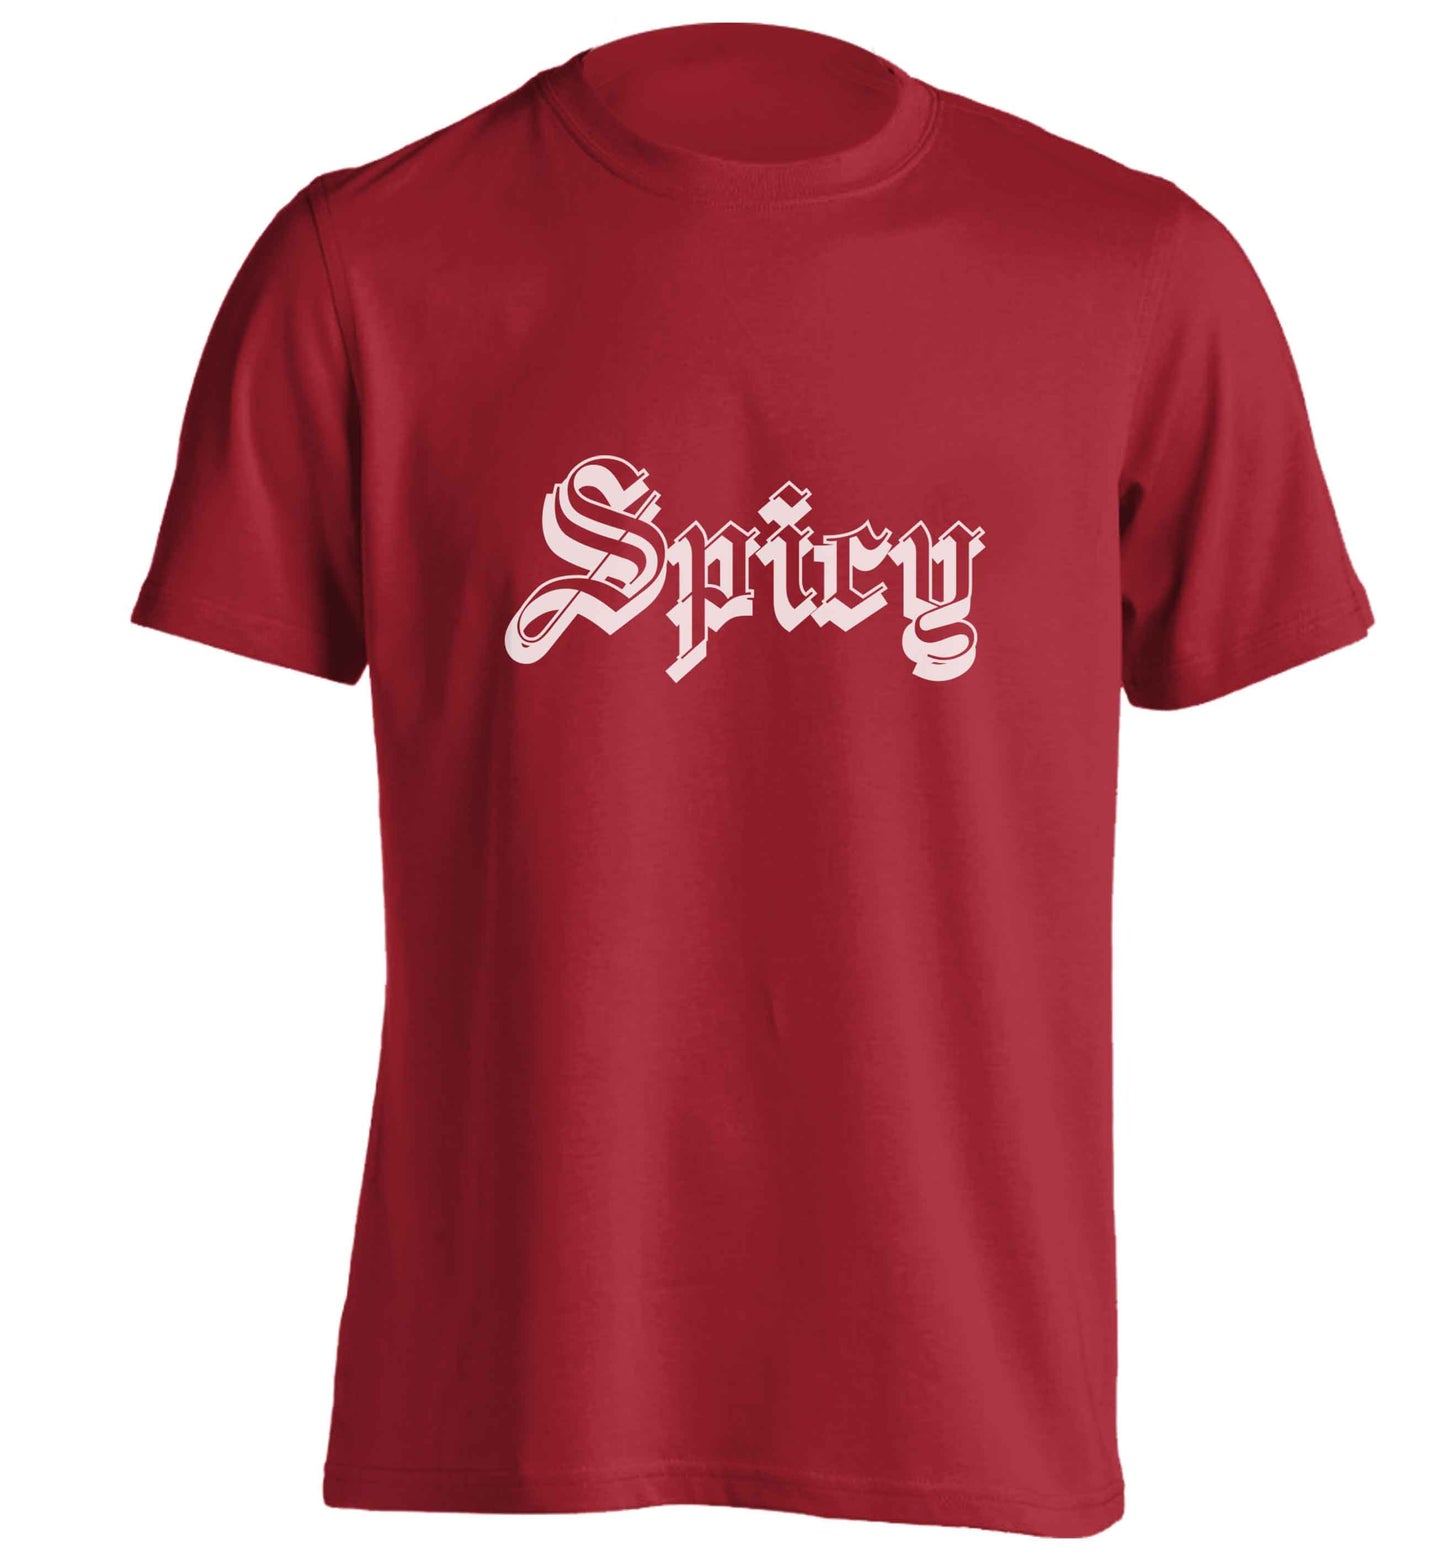 Spicy adults unisex red Tshirt 2XL